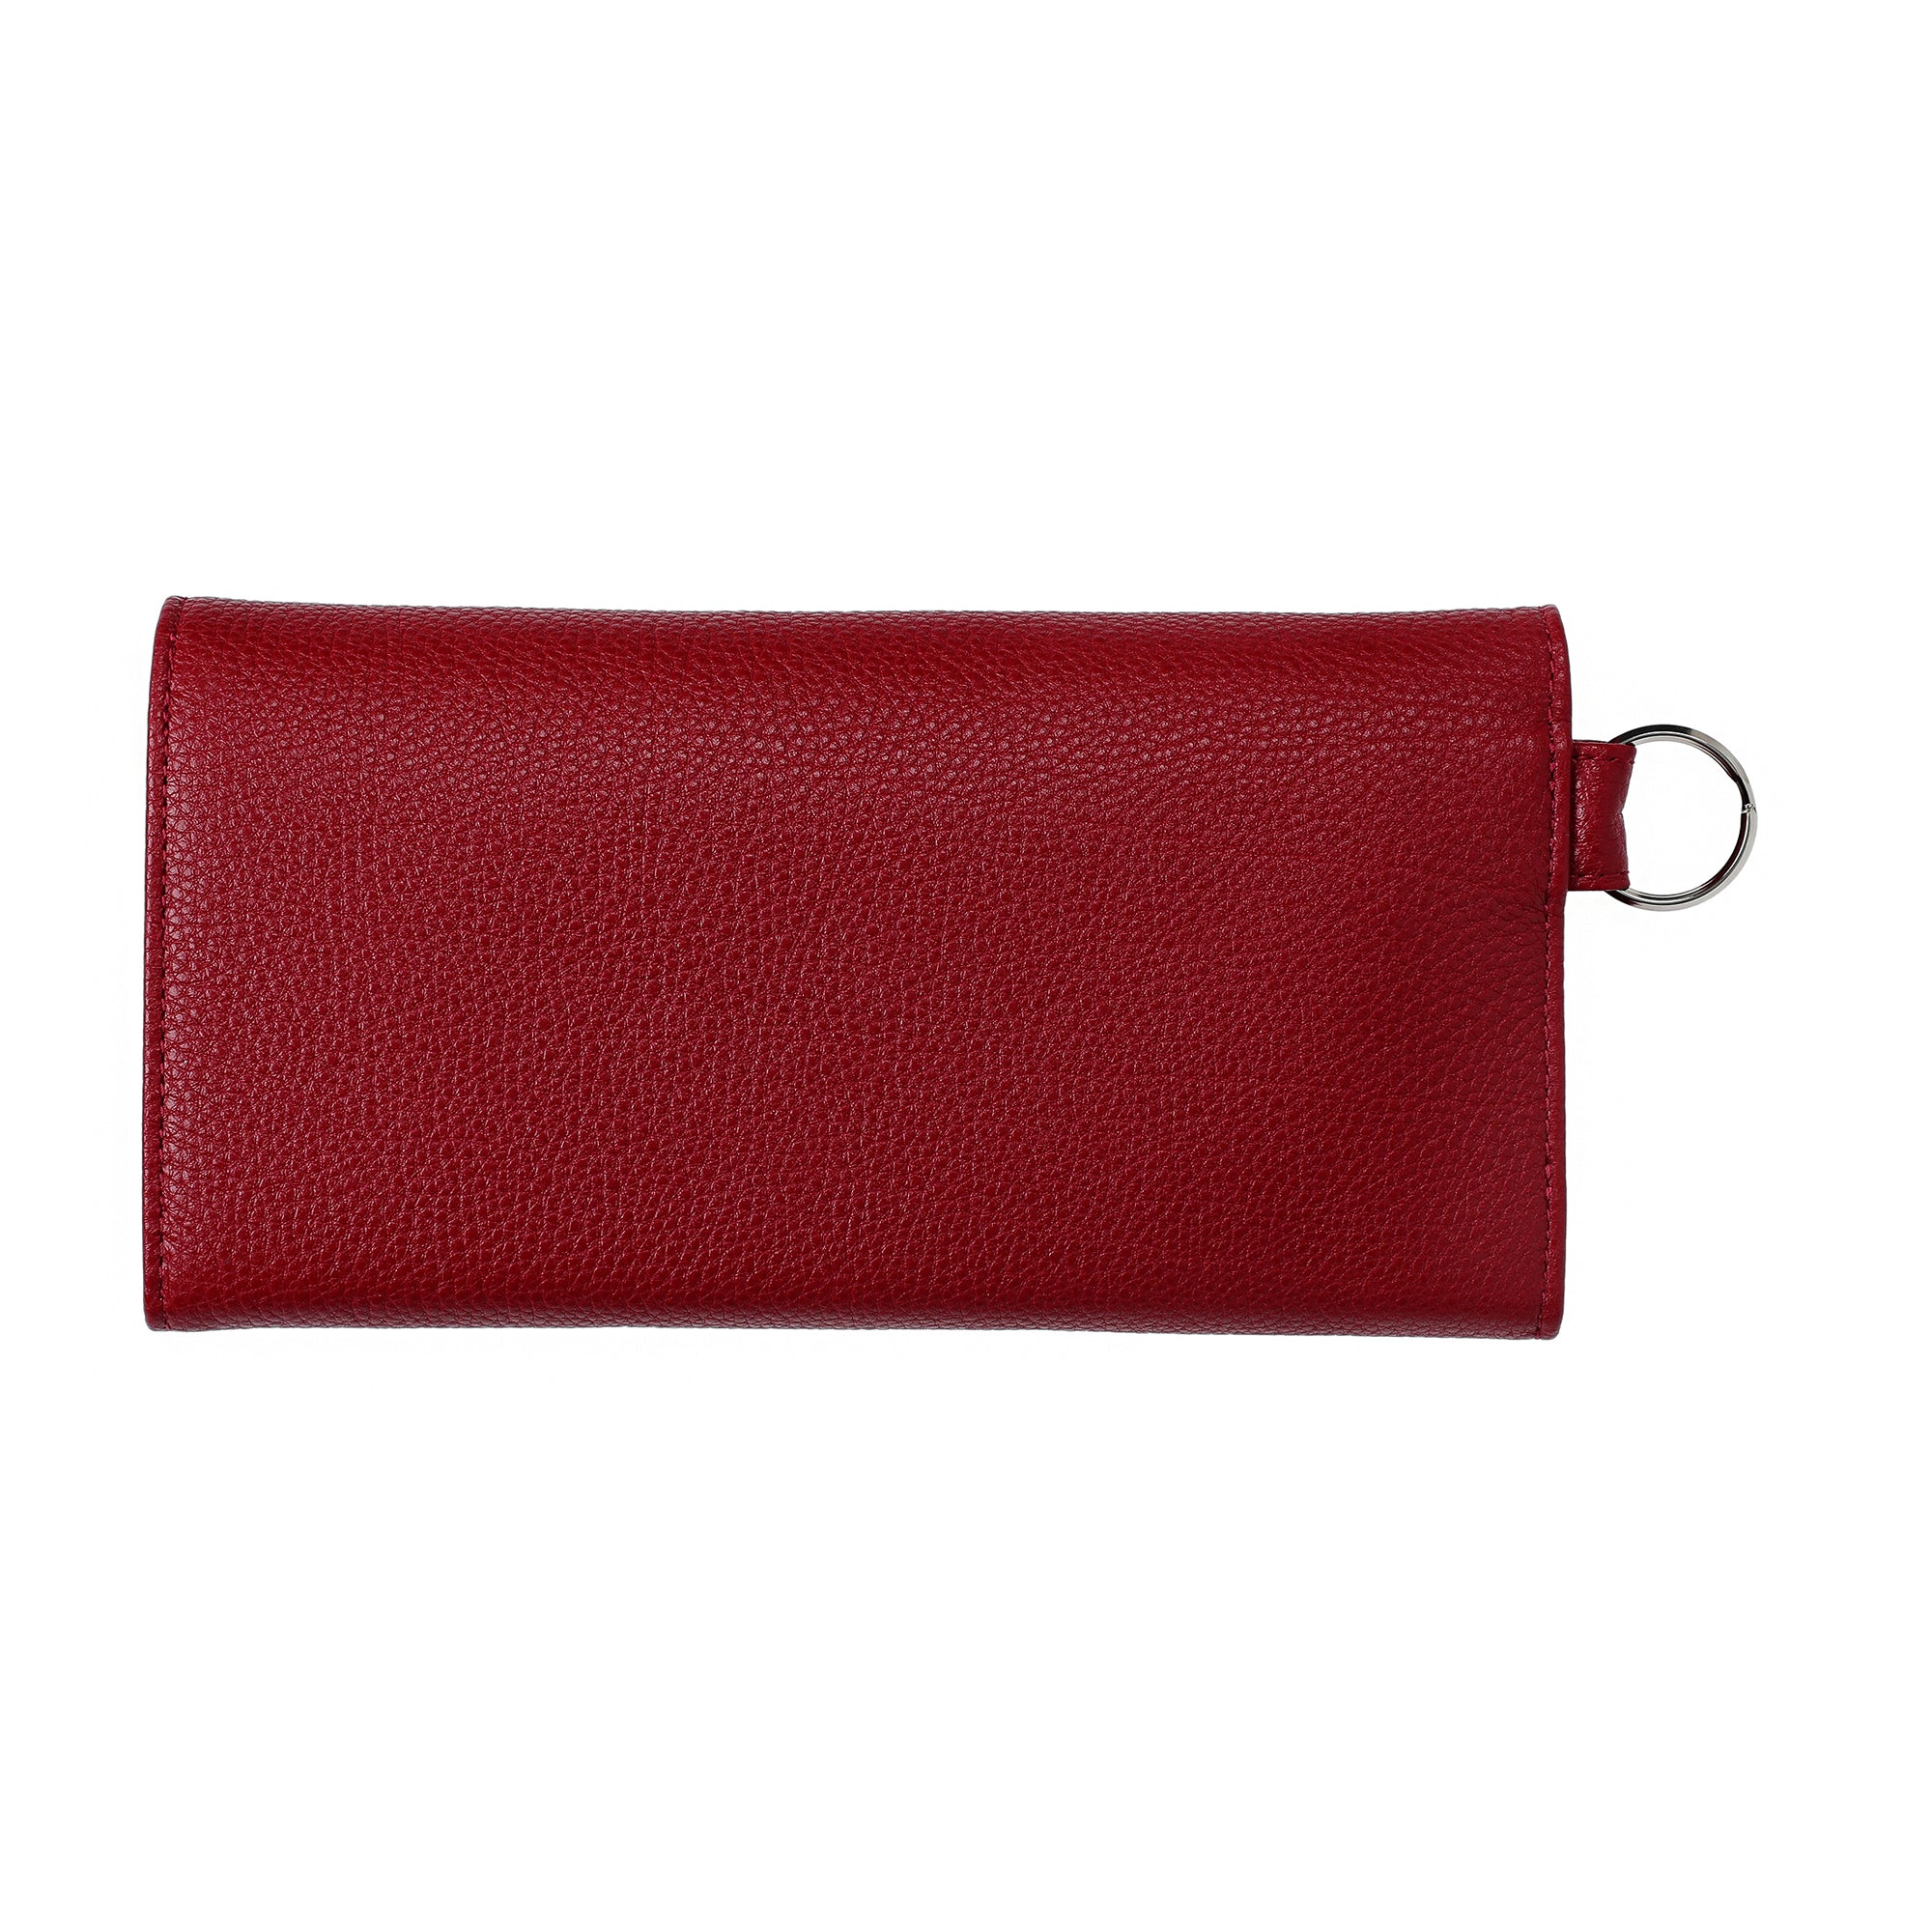 PORTER - Shrink Long Purse - (Red) view 2